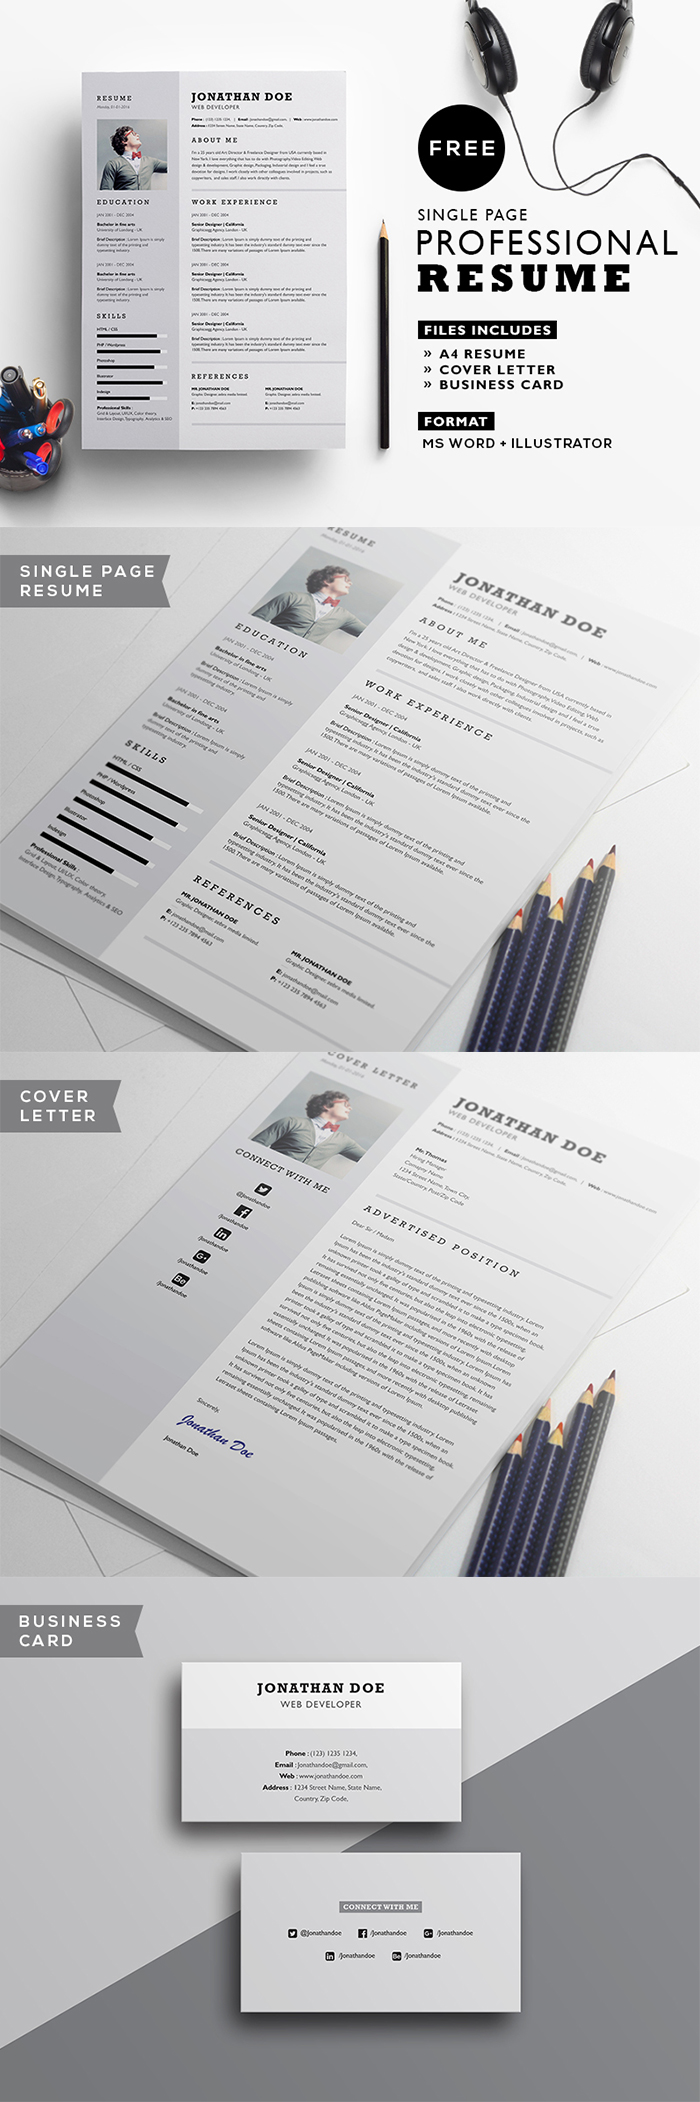 Free professional resume template